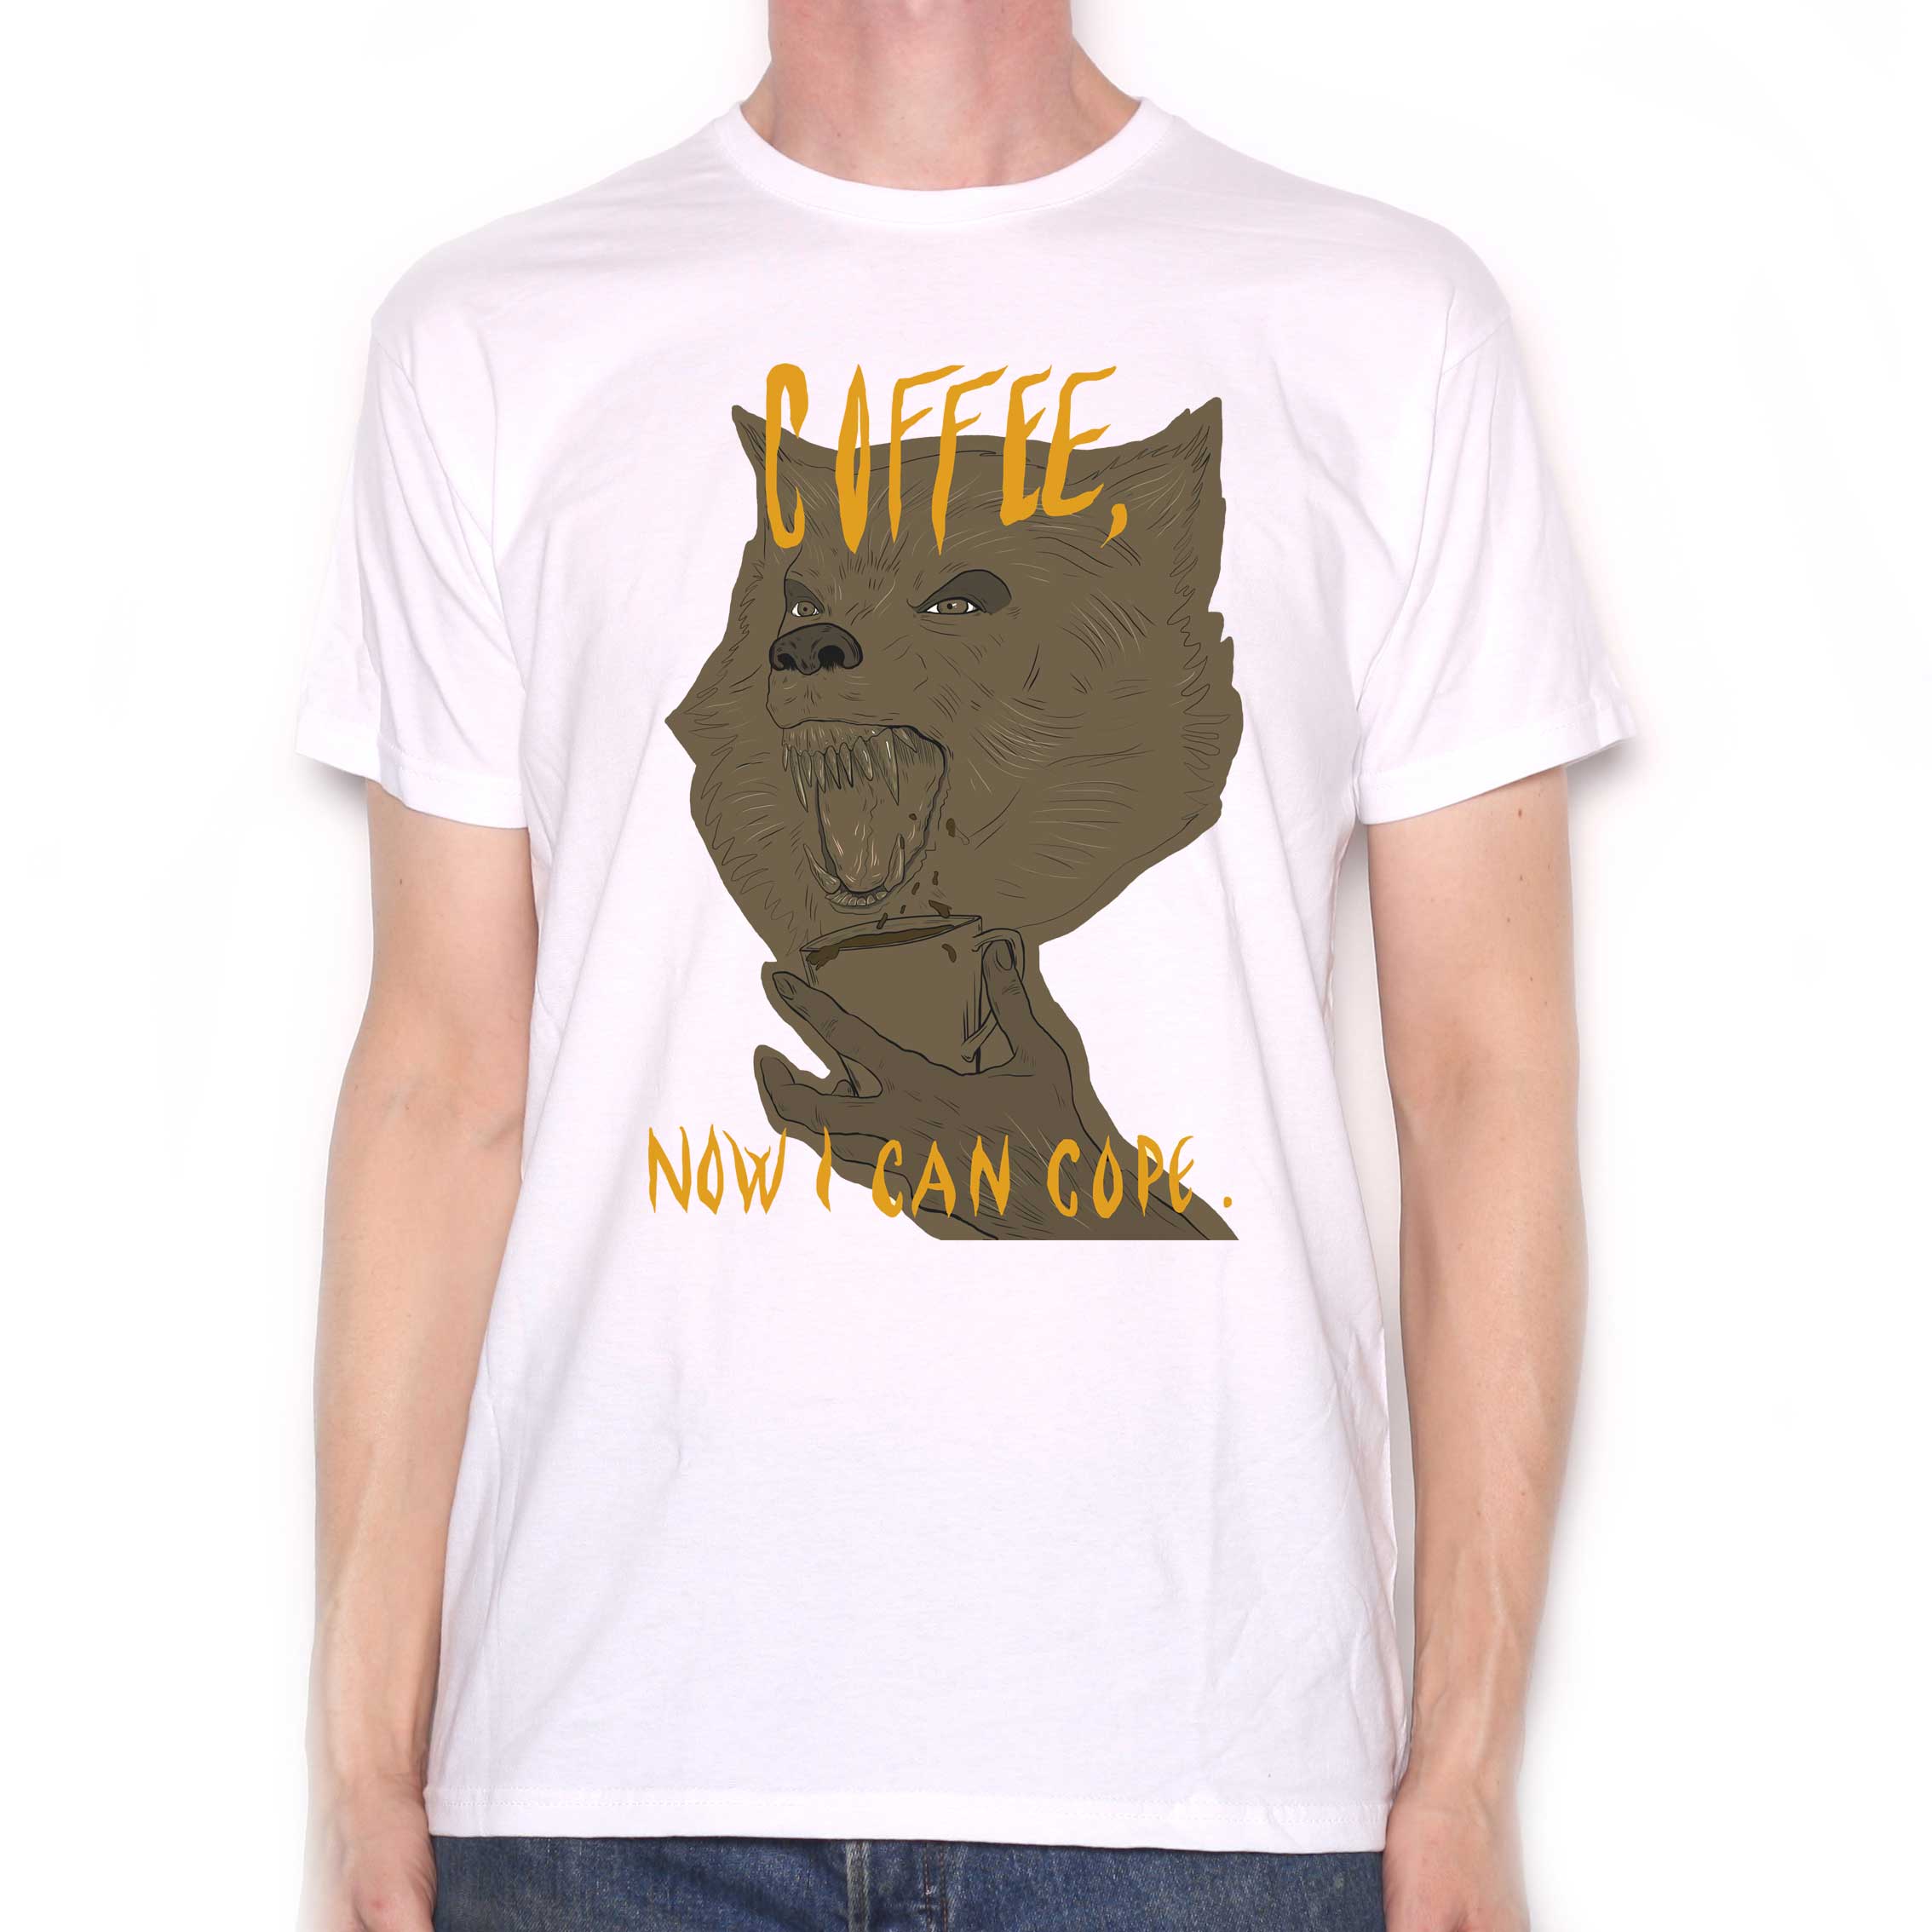 Coffee T Shirt - Coffee, Now I Can Cope